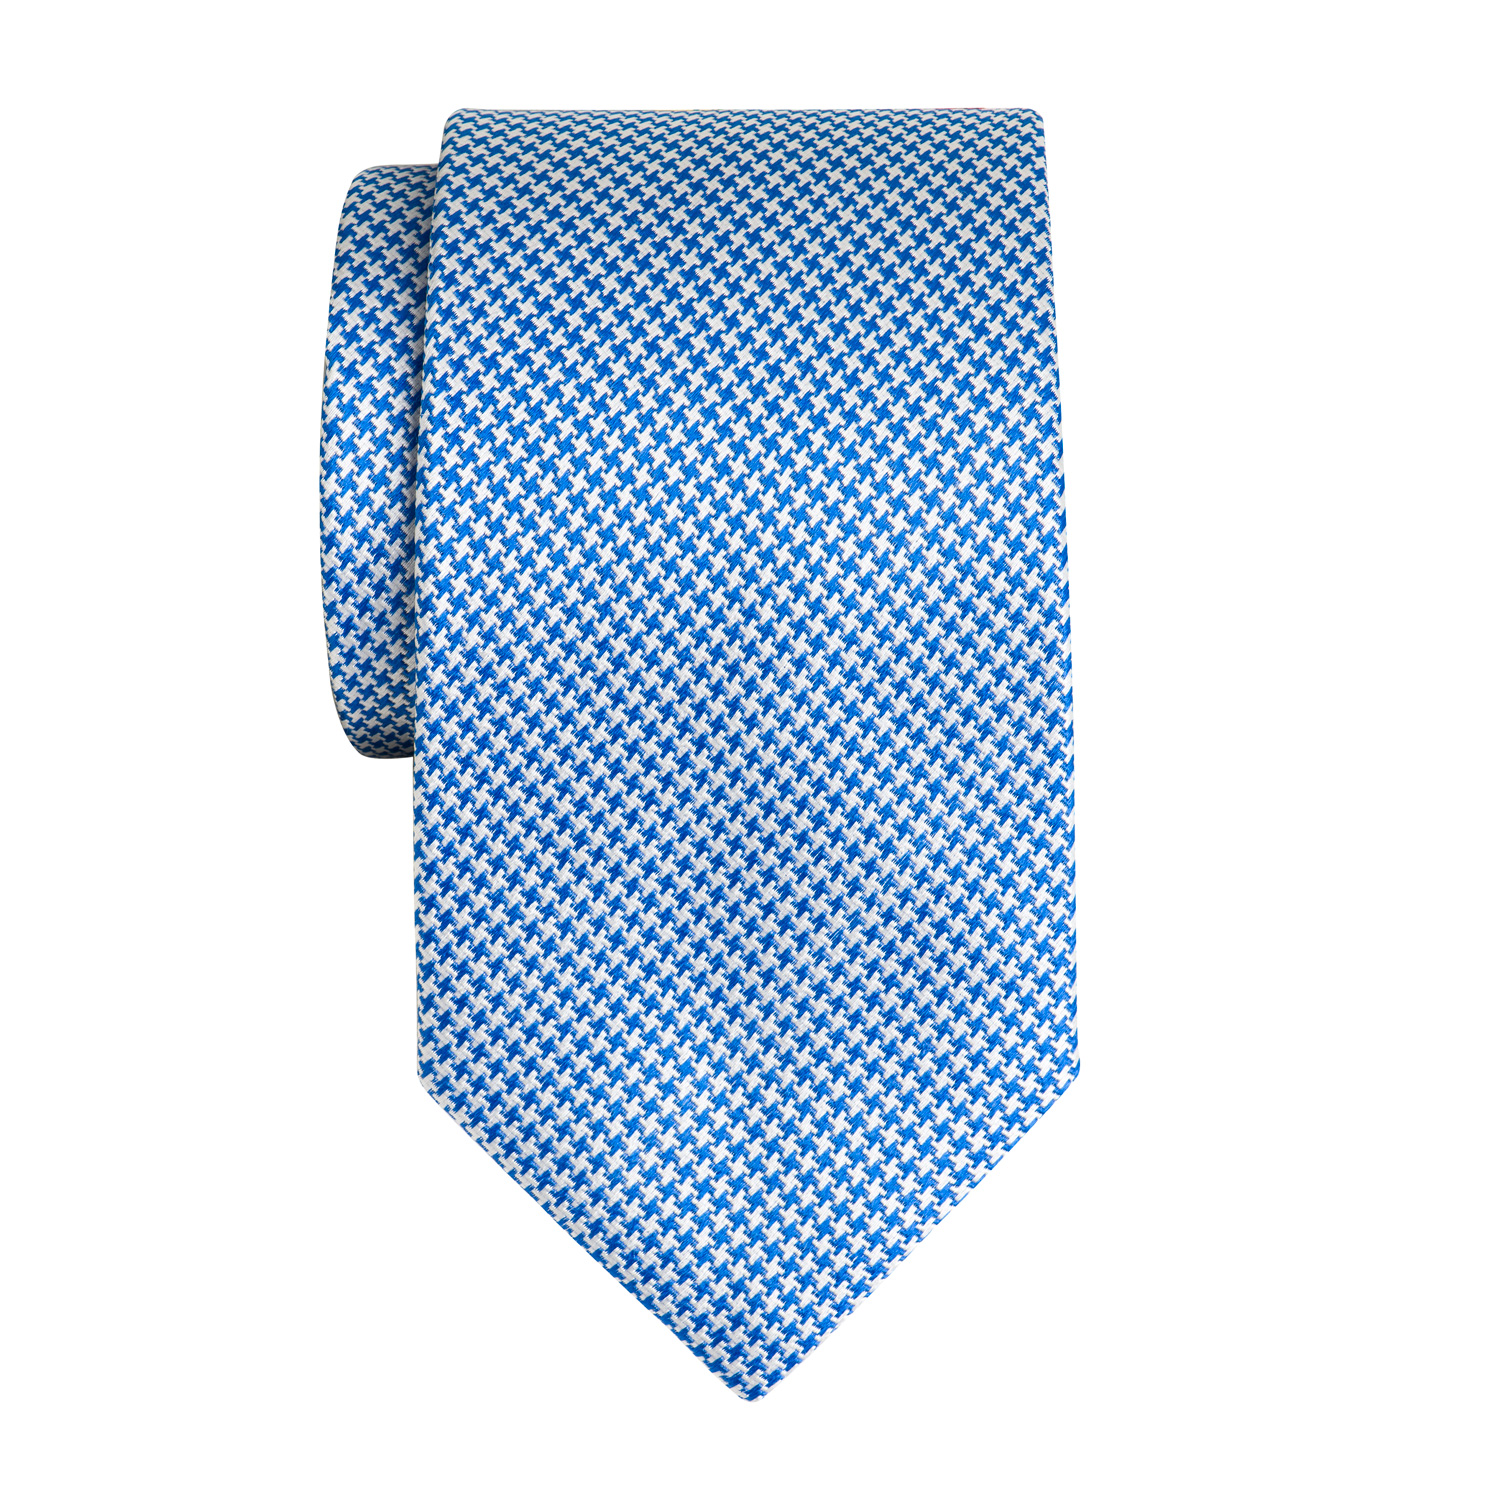 Royal & White Houndstooth Tie